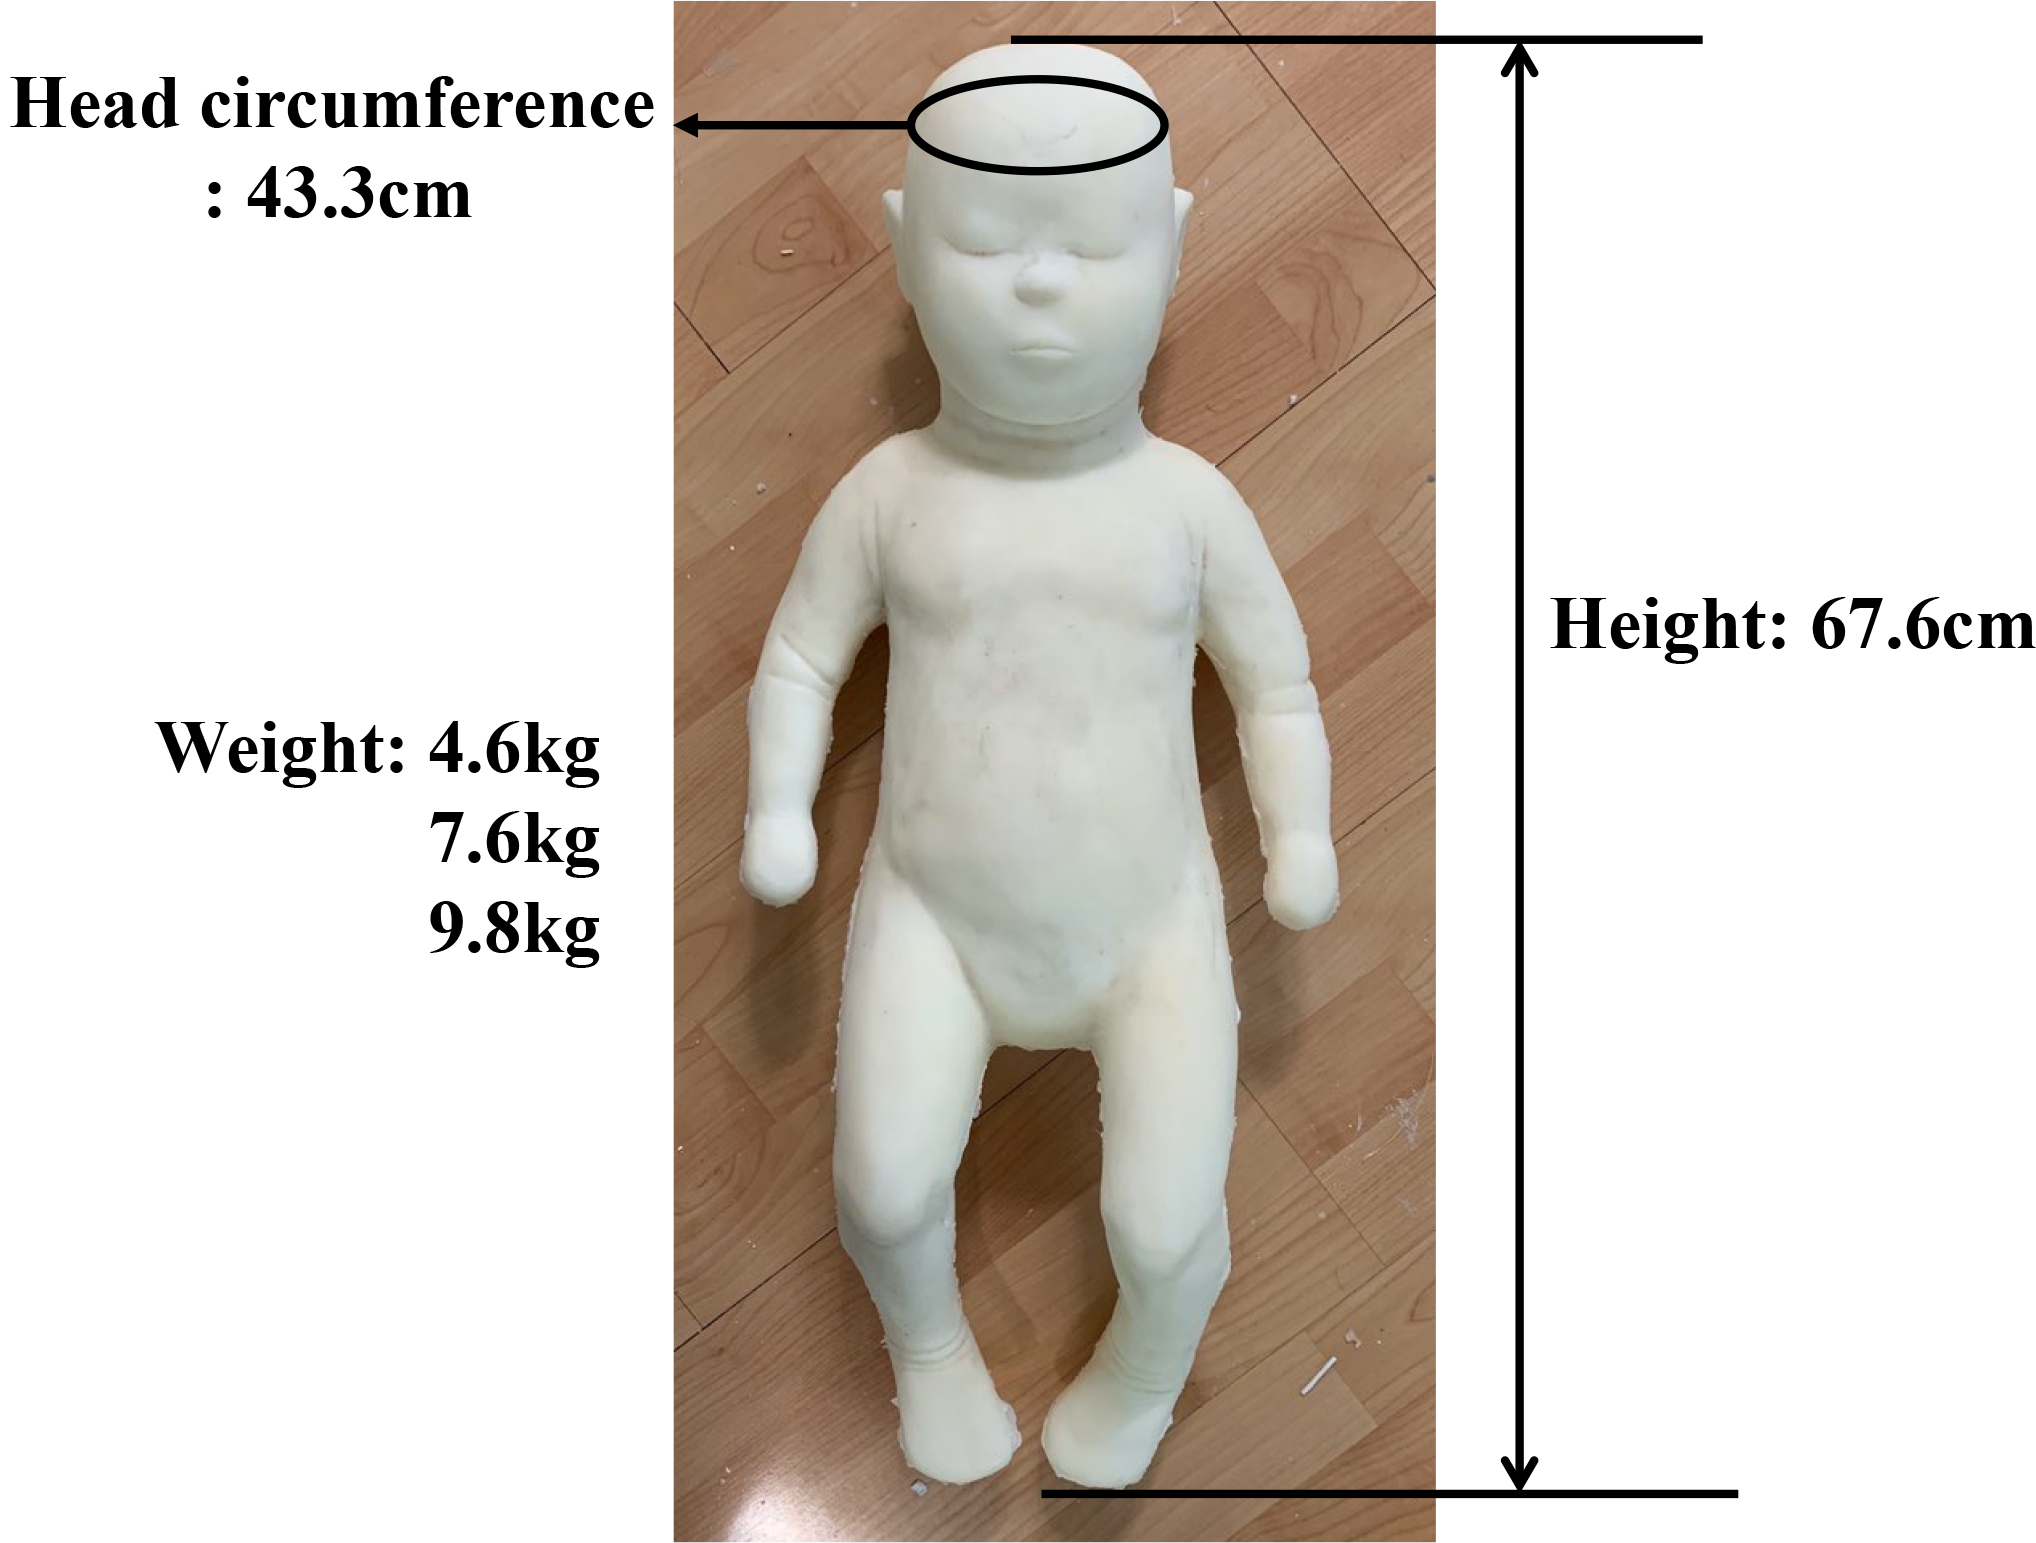 The specification of the developed infant dummy.